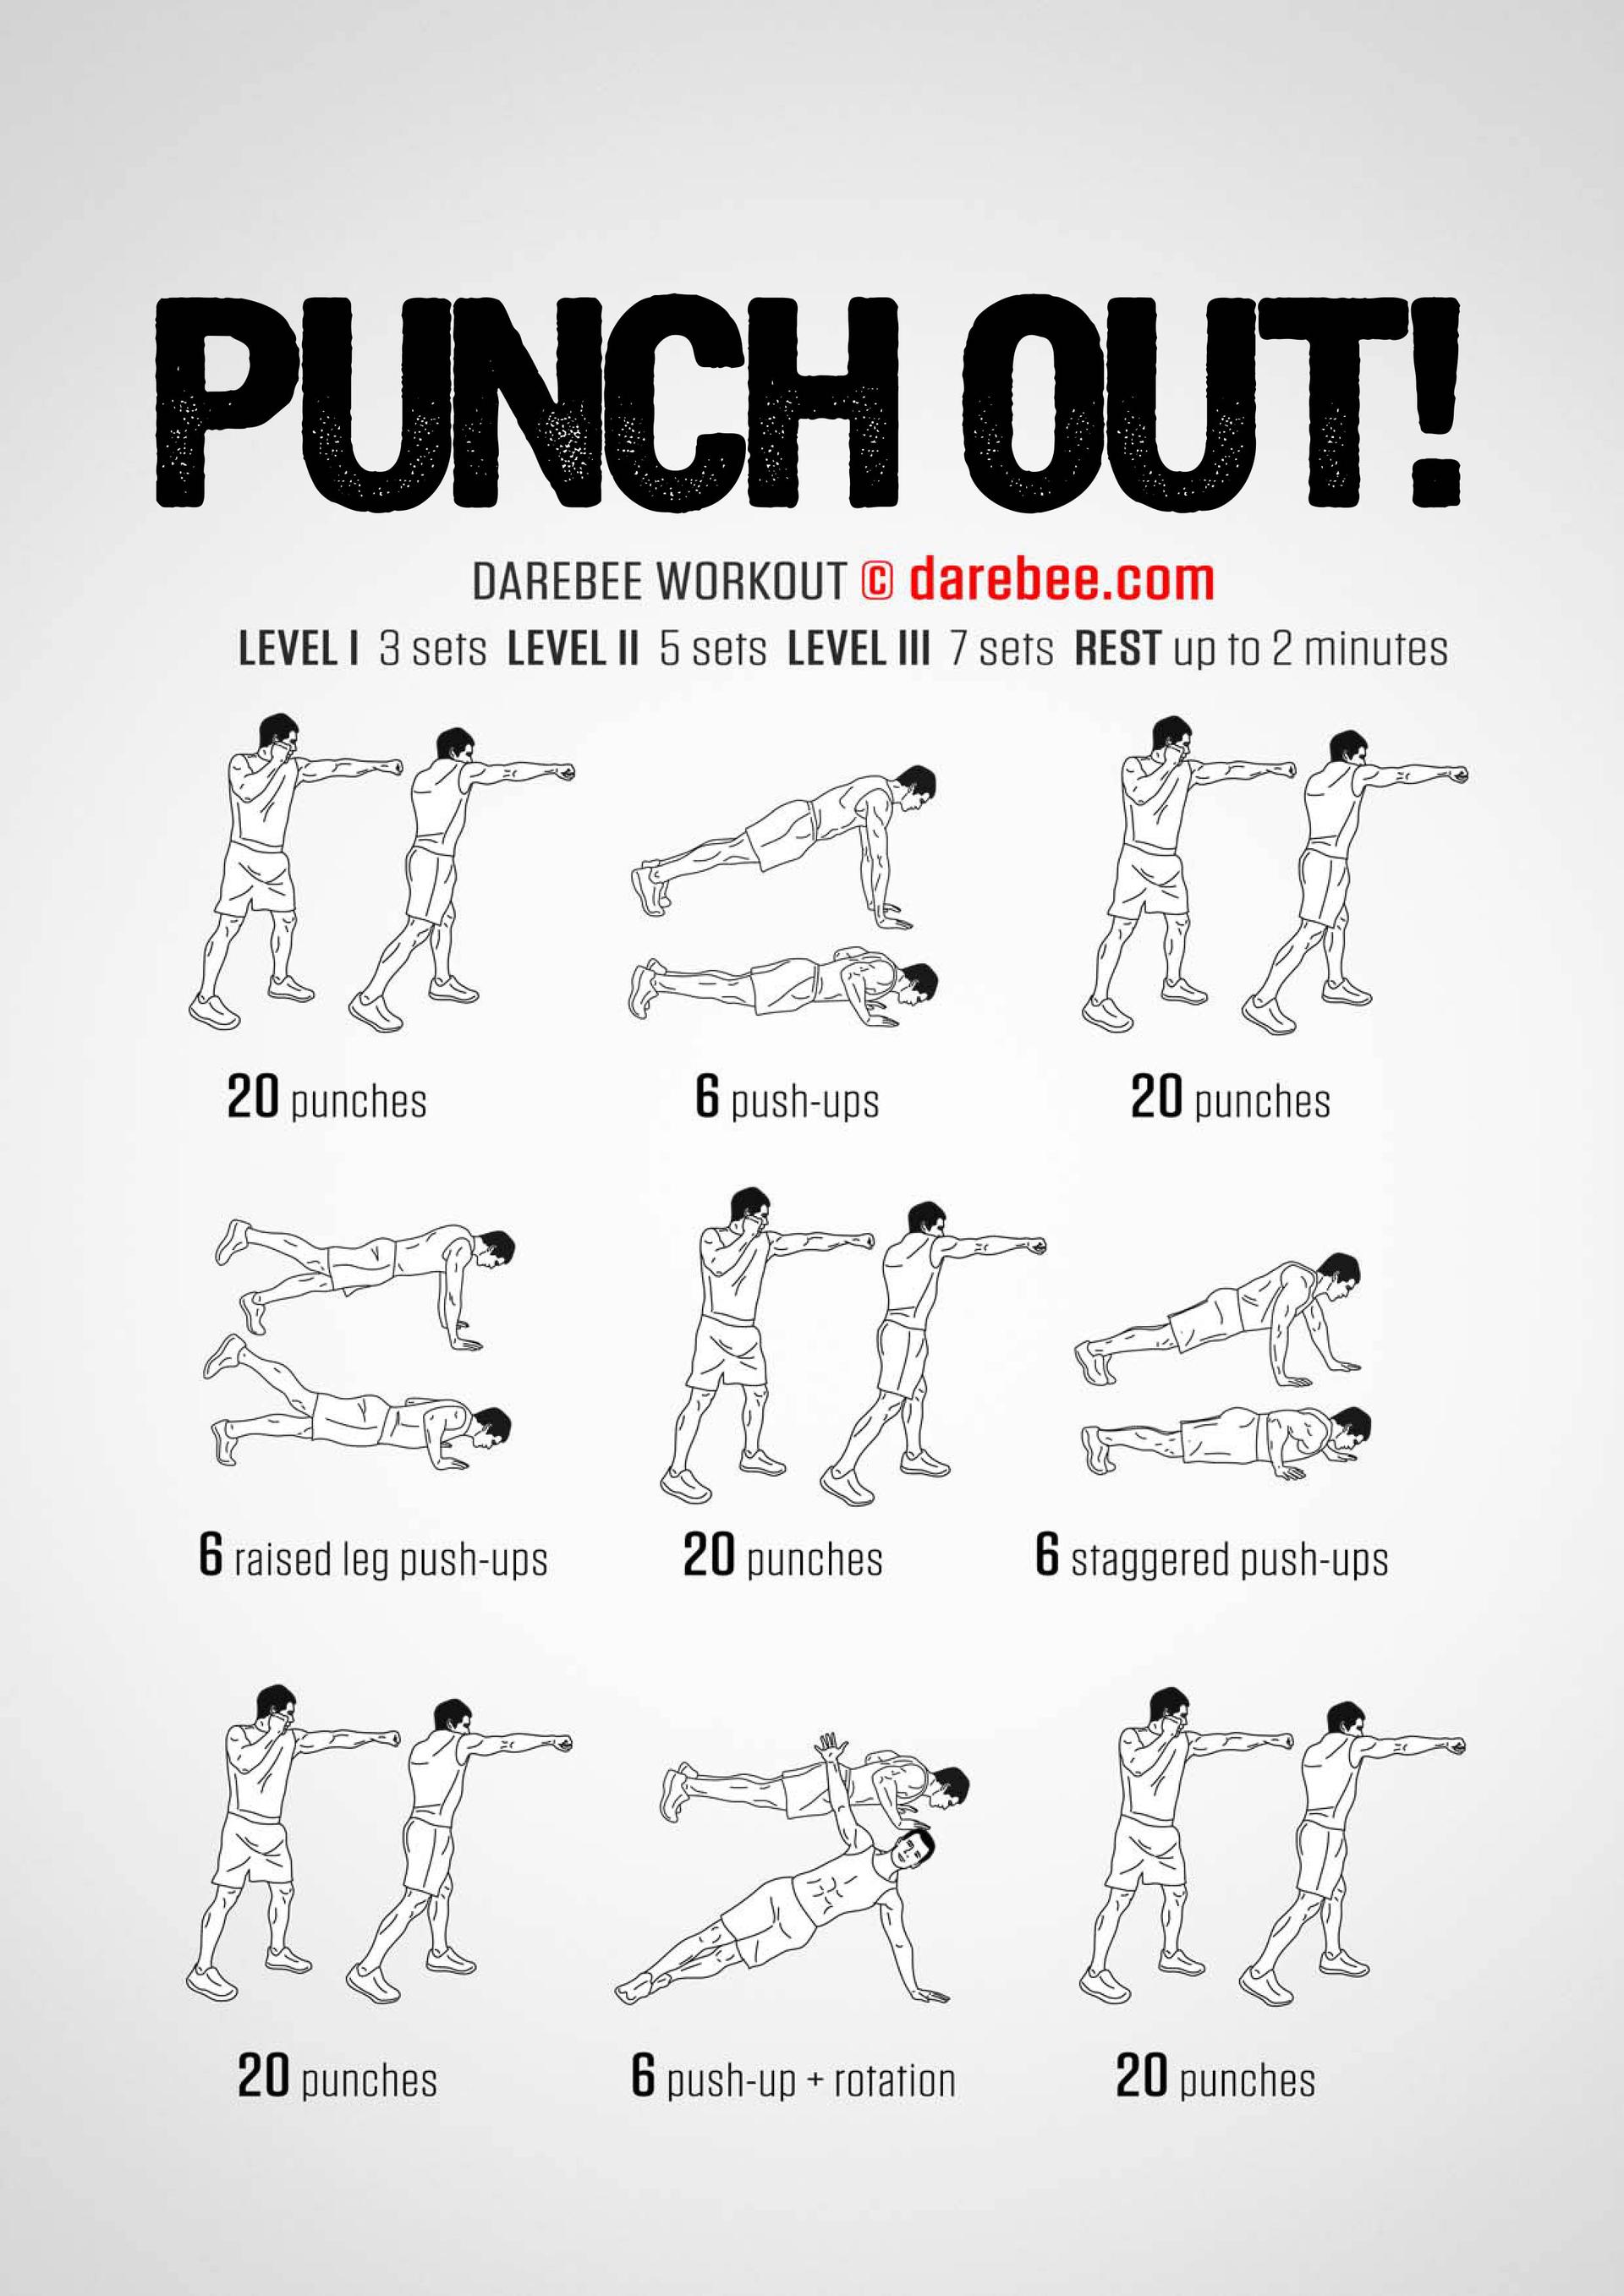 Punch Out! Workout by darebee.com